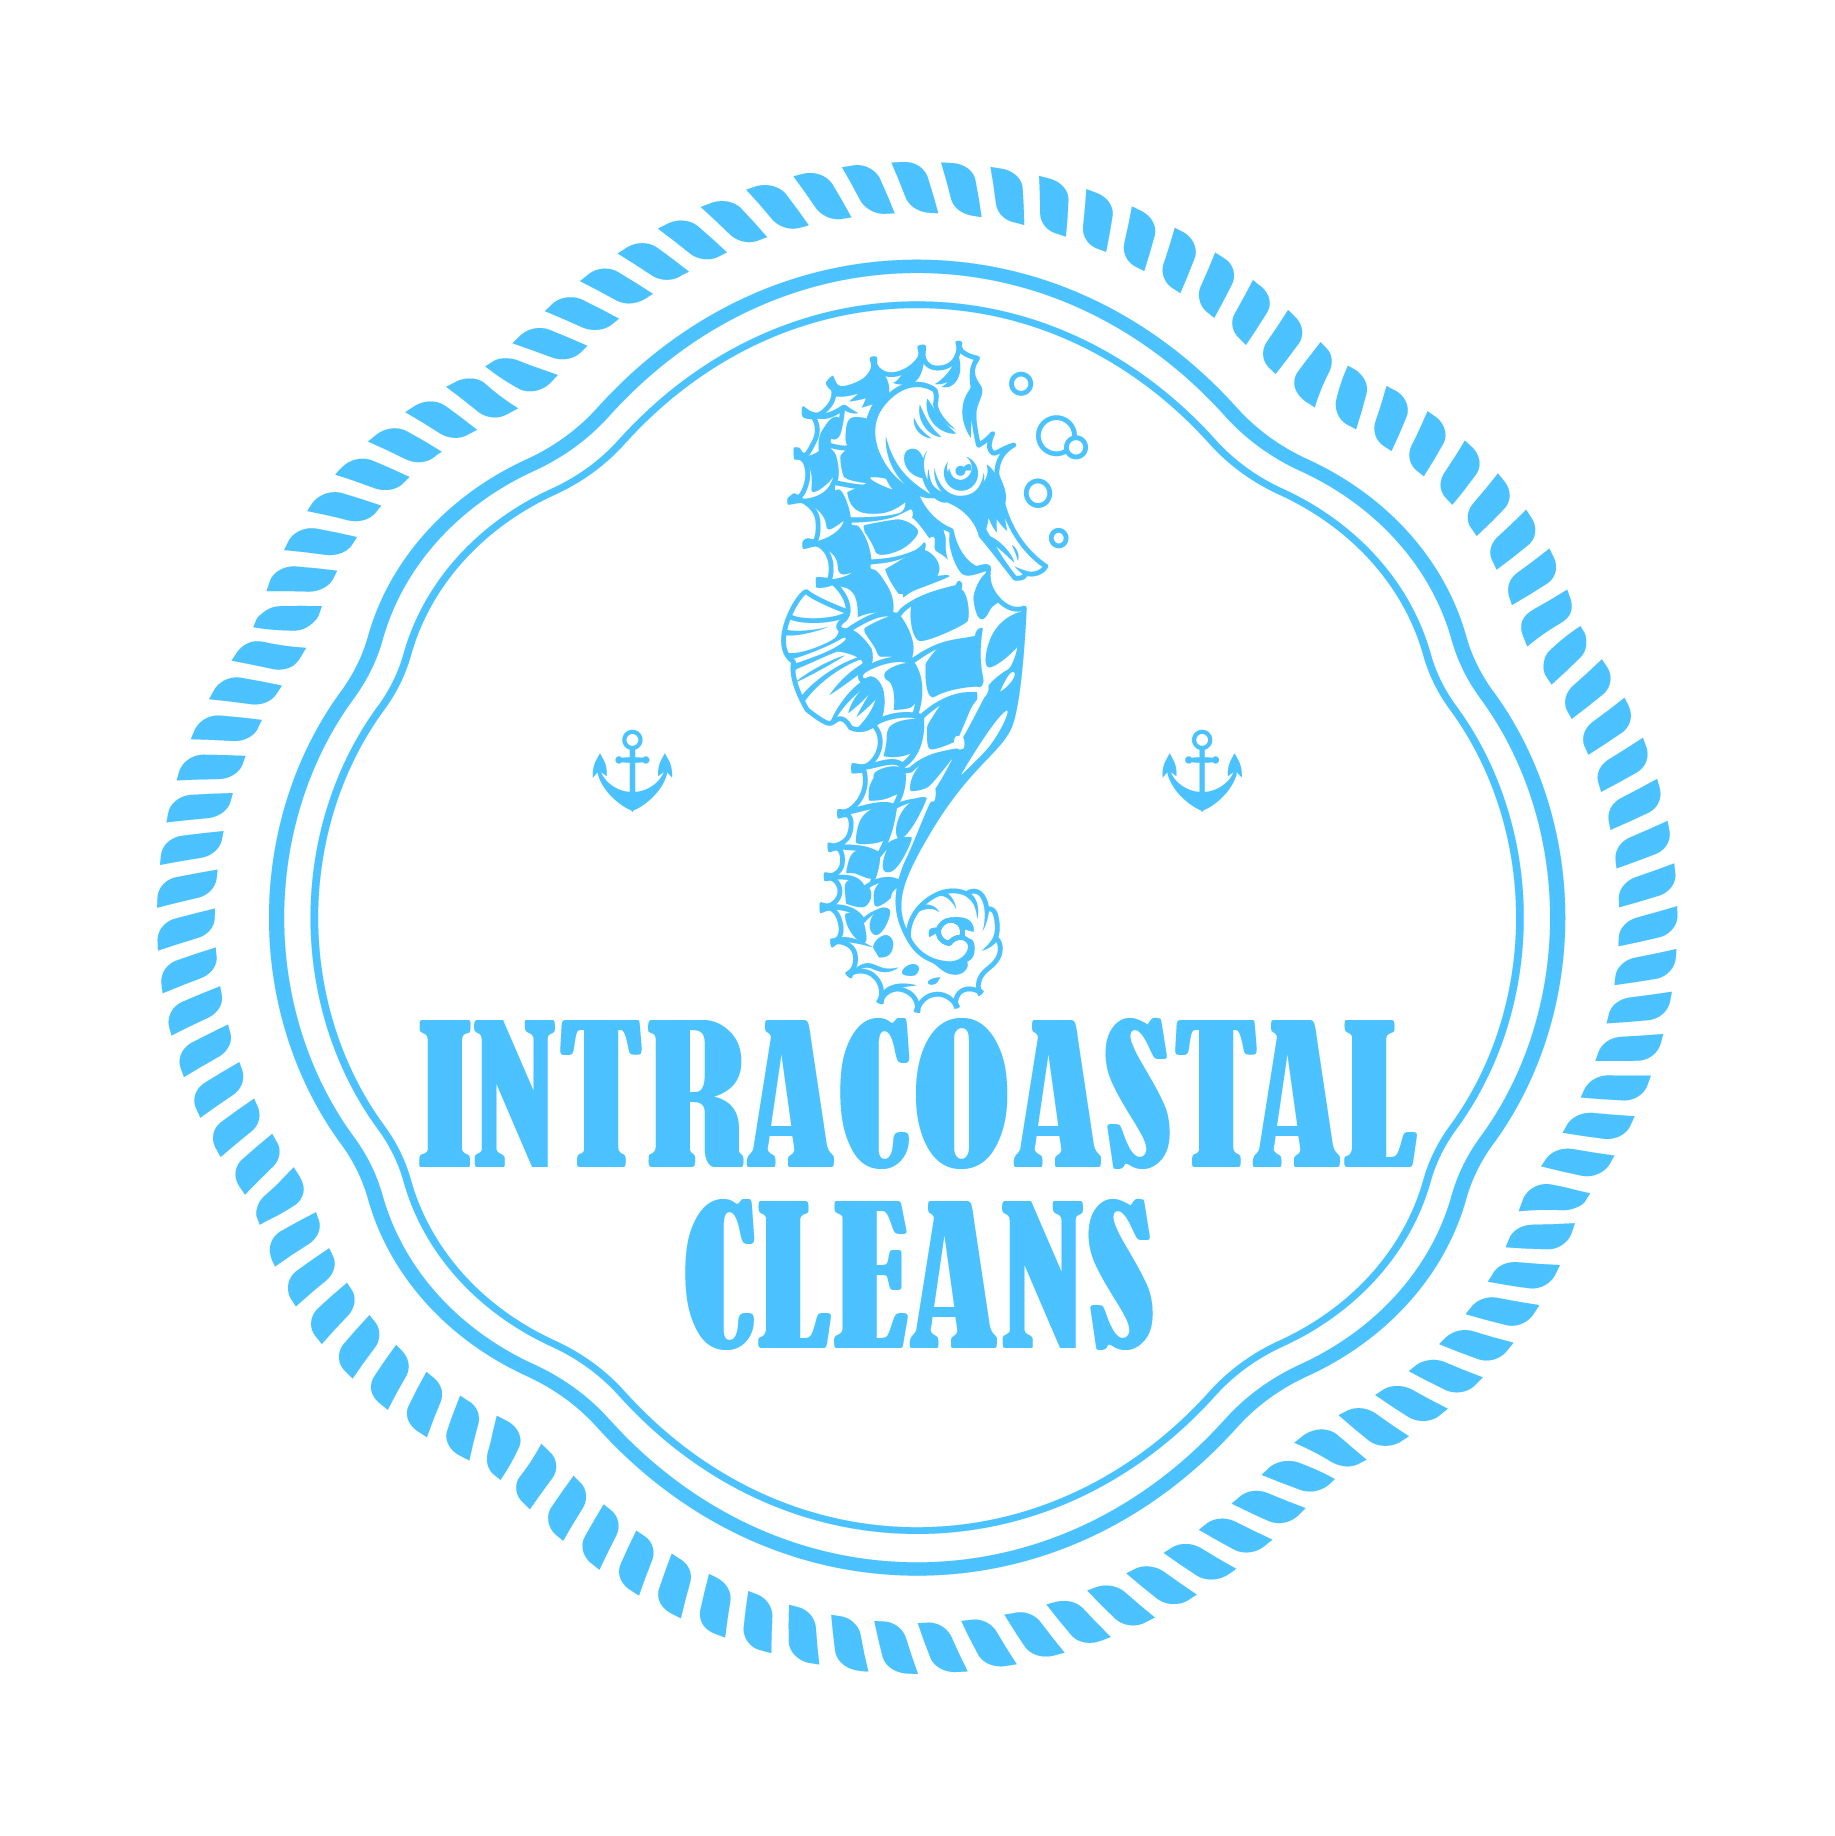 Intracoastal Cleans Now Offers Best Wilmington NC Cleaning Service with Unmatched Excellence